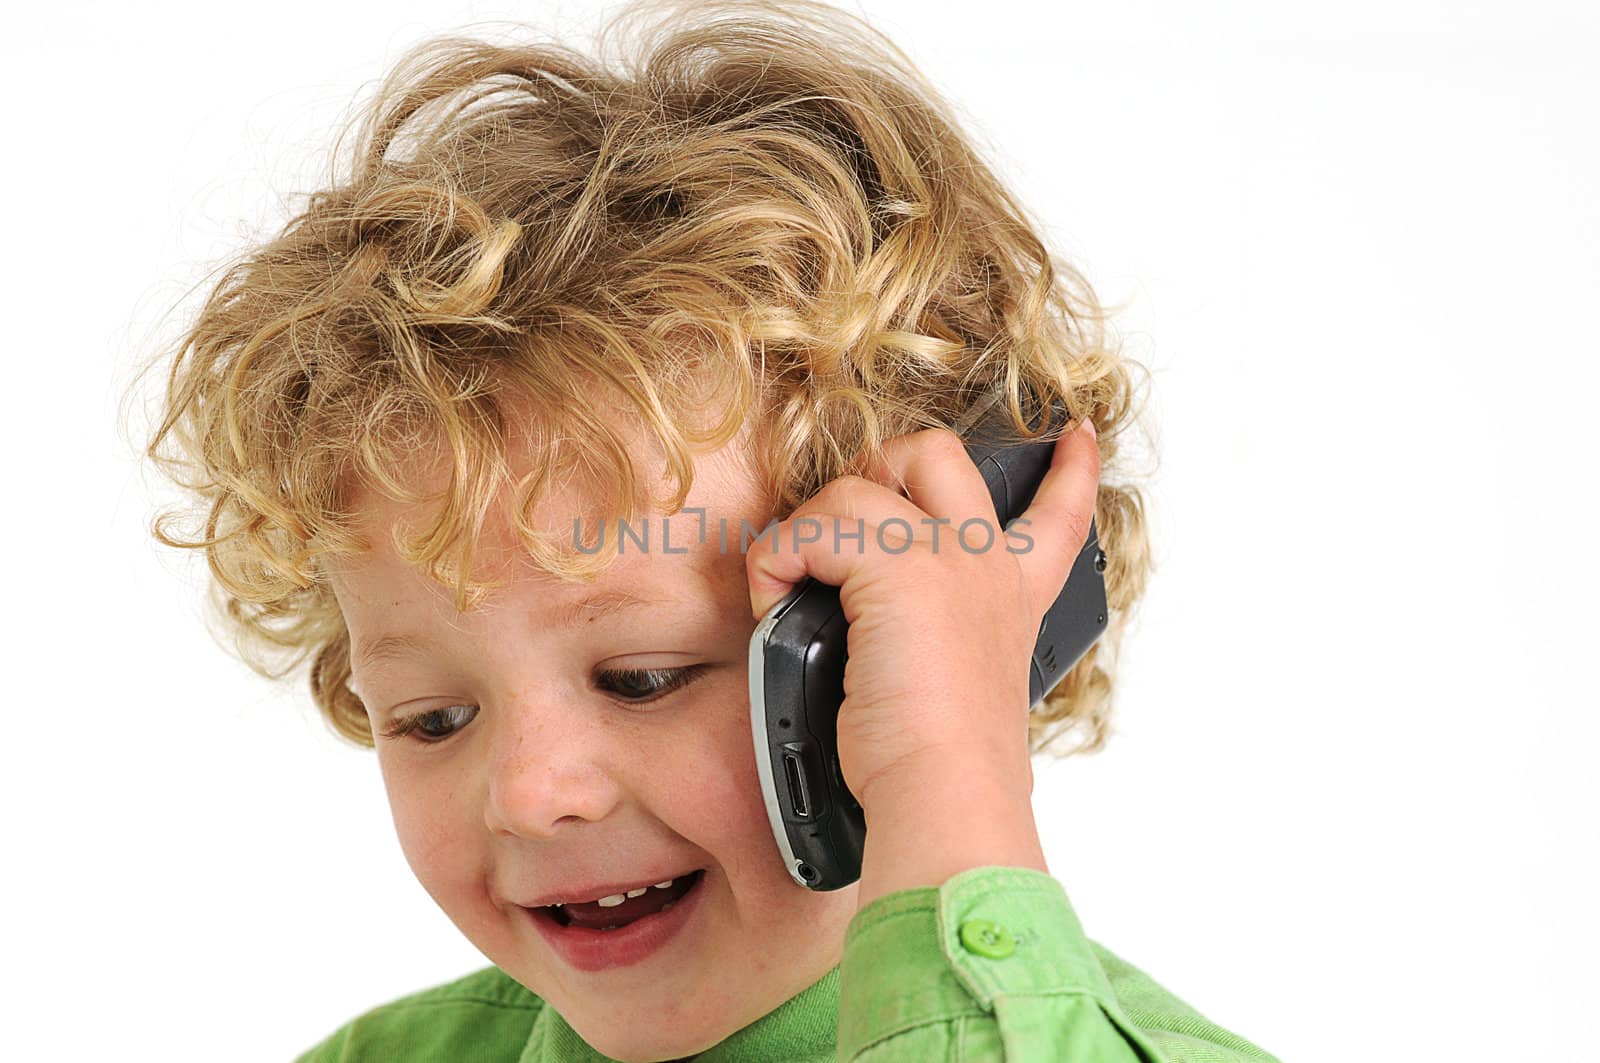 blond curly haired boy talking on mobile phone happy and smiling